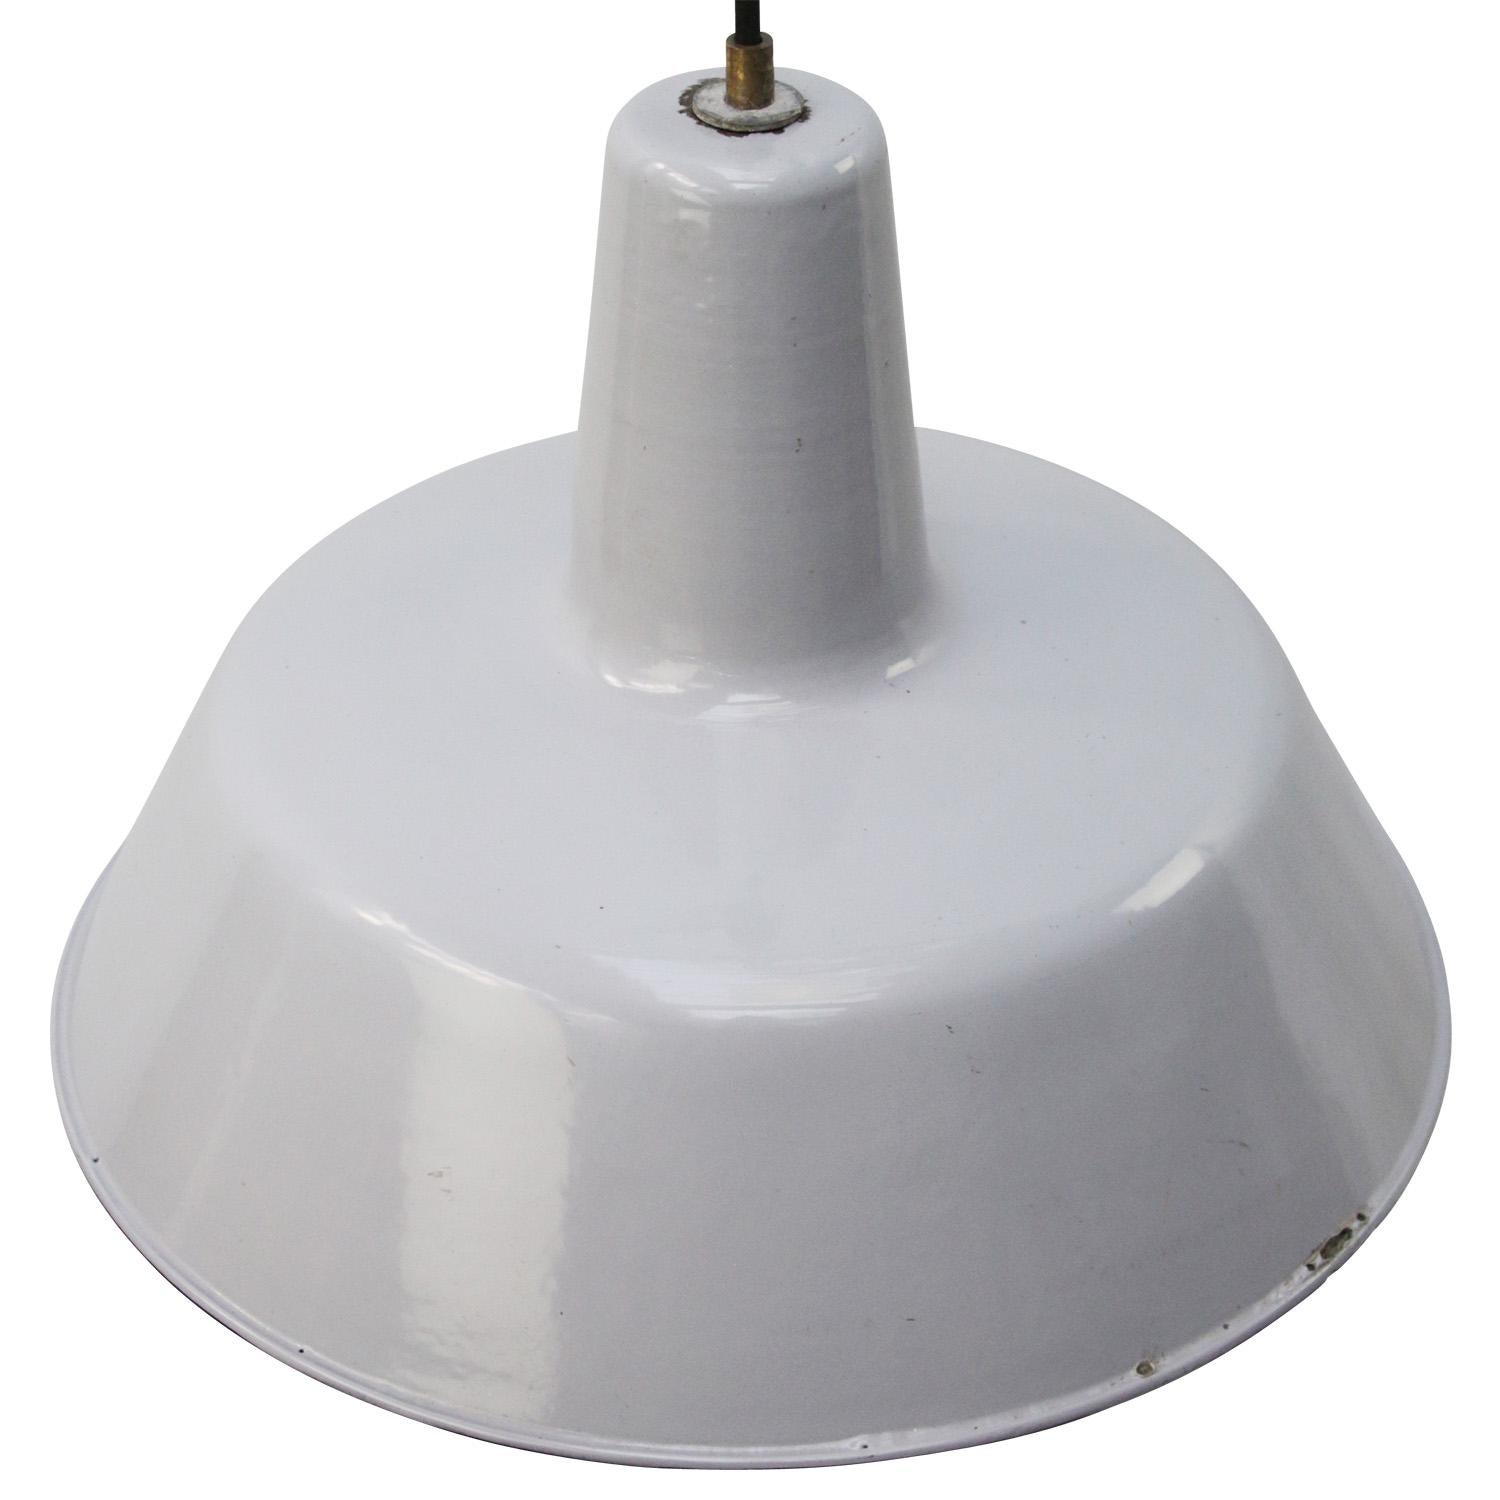 Dutch industrial hanging lamp by Philips
Gray enamel white interior

Weight: 2.10 kg / 4.6 lb

Priced per individual item. All lamps have been made suitable by international standards for incandescent light bulbs, energy-efficient and LED